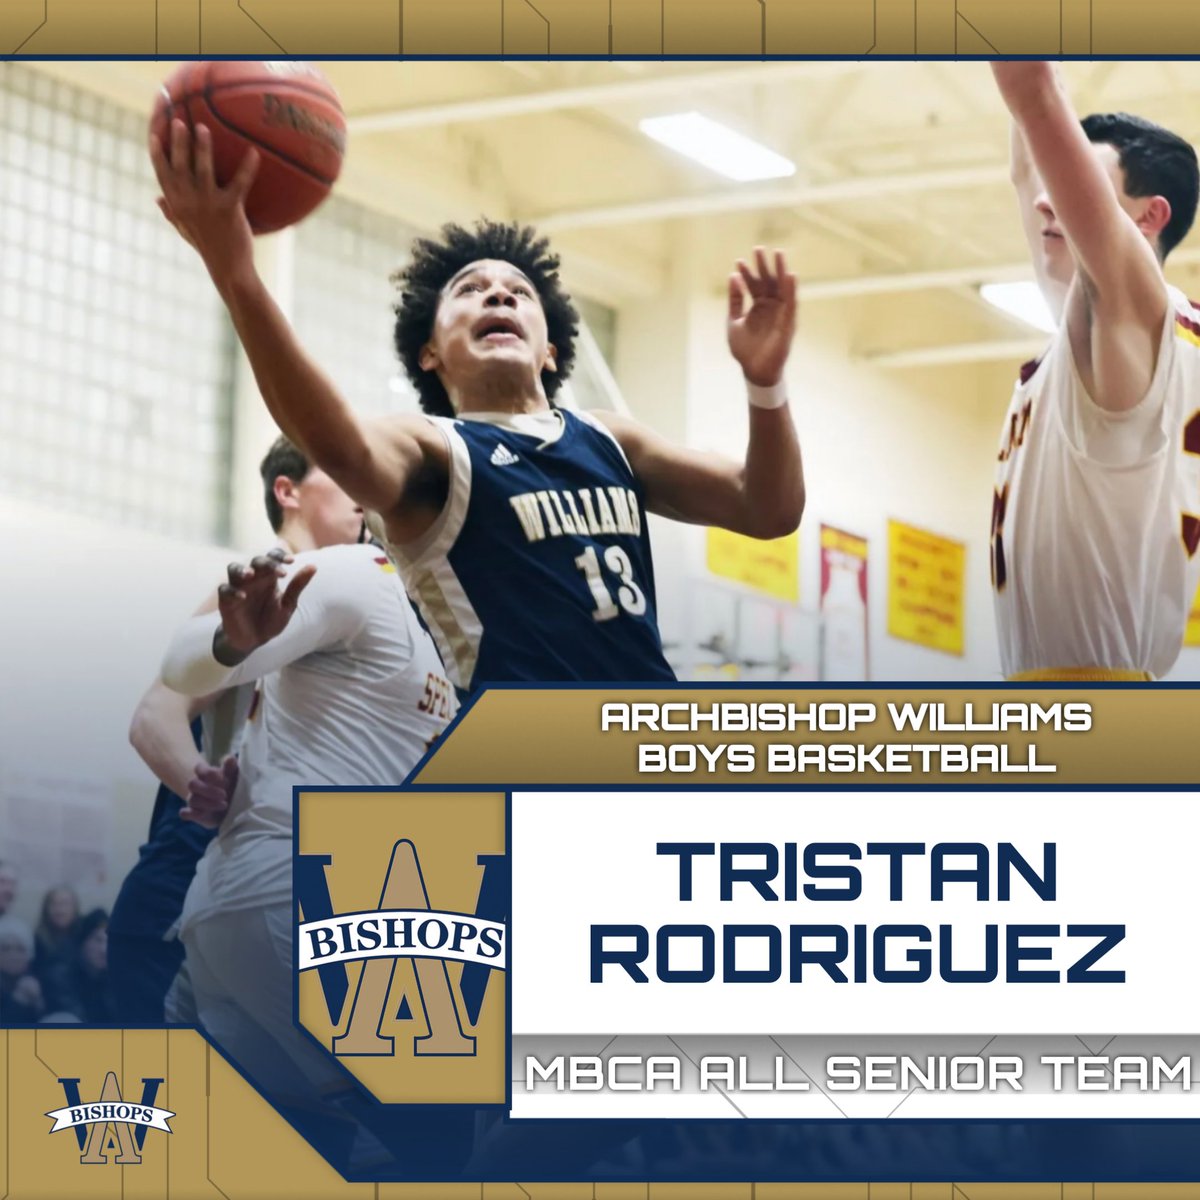 BOYS BASKETBALL: Congratulations to Senior Captain Tristan Rodriguez on being named a MBCA All Senior team! Way to go Tristan! #rollbills @bbbishops